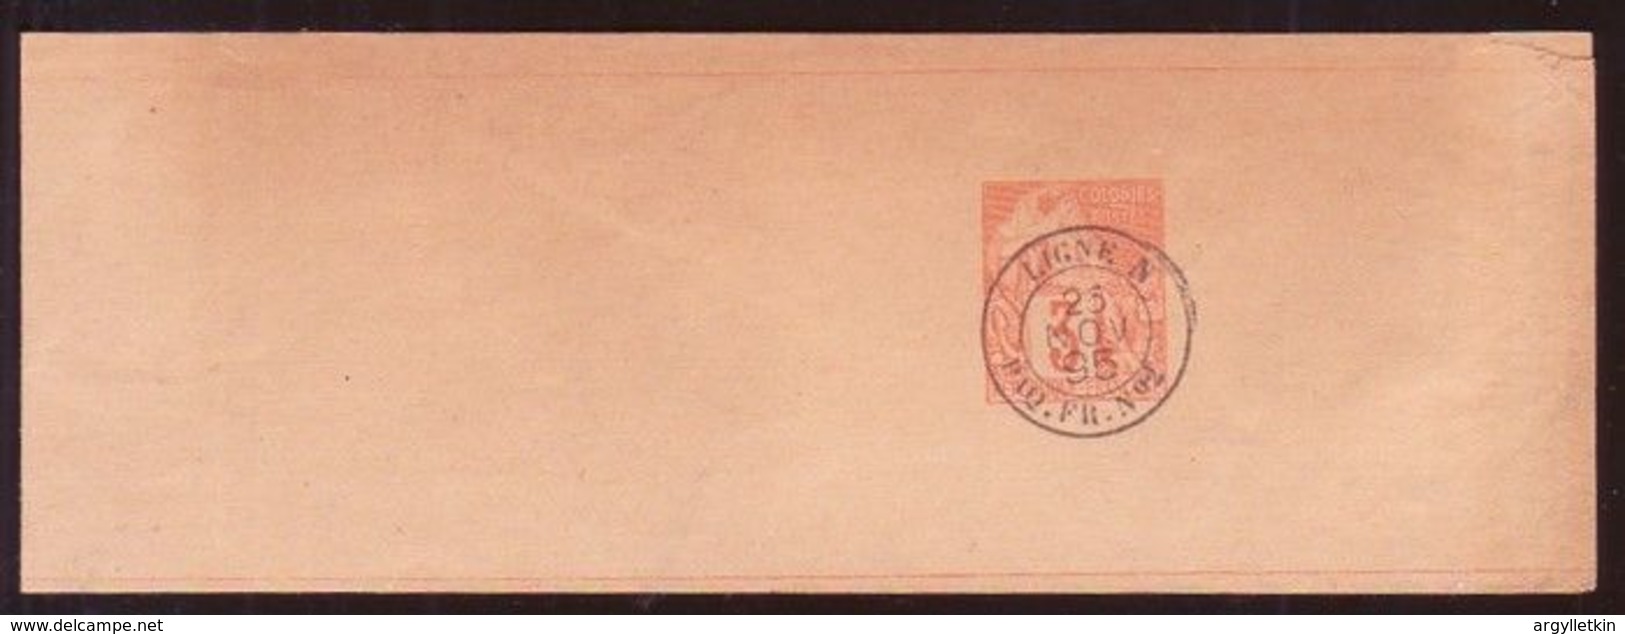 FRANCE/CHINA/VIETNAM/SHIPPING WRAPPER 1895 3c - Journaux